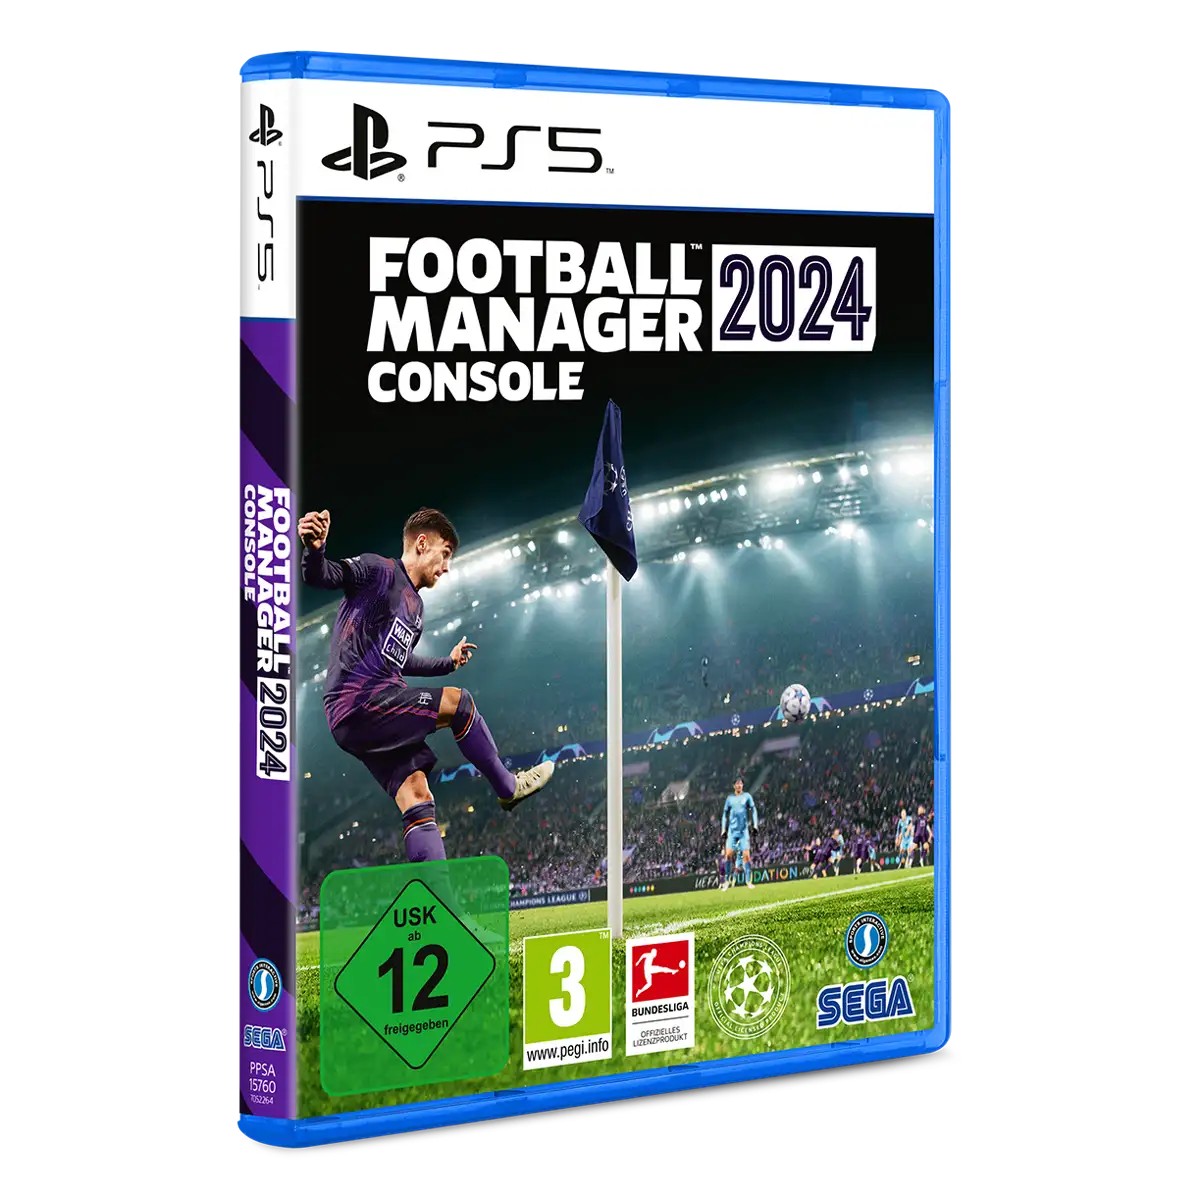 Football Manager 2024 (PS5) Image 2